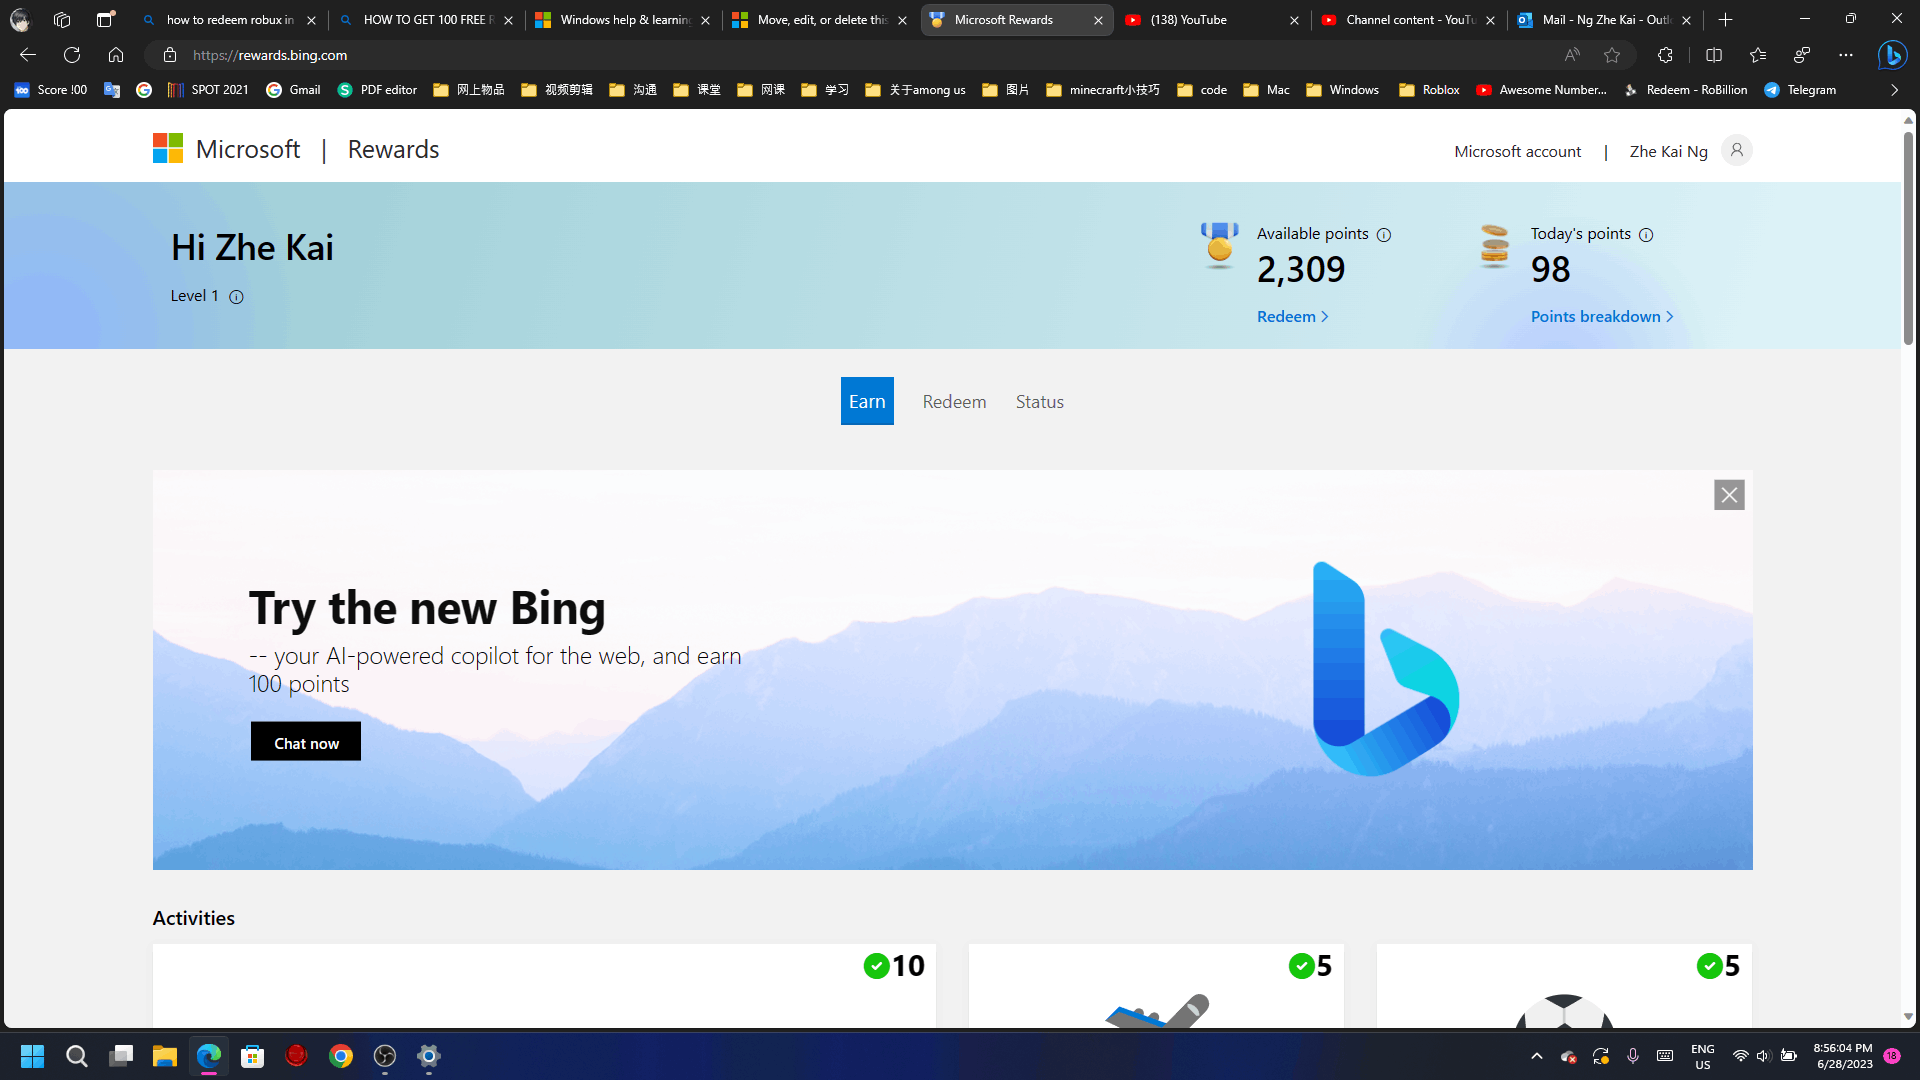 Microsoft Rewards Robux not showing up Roblox card: 6 tips